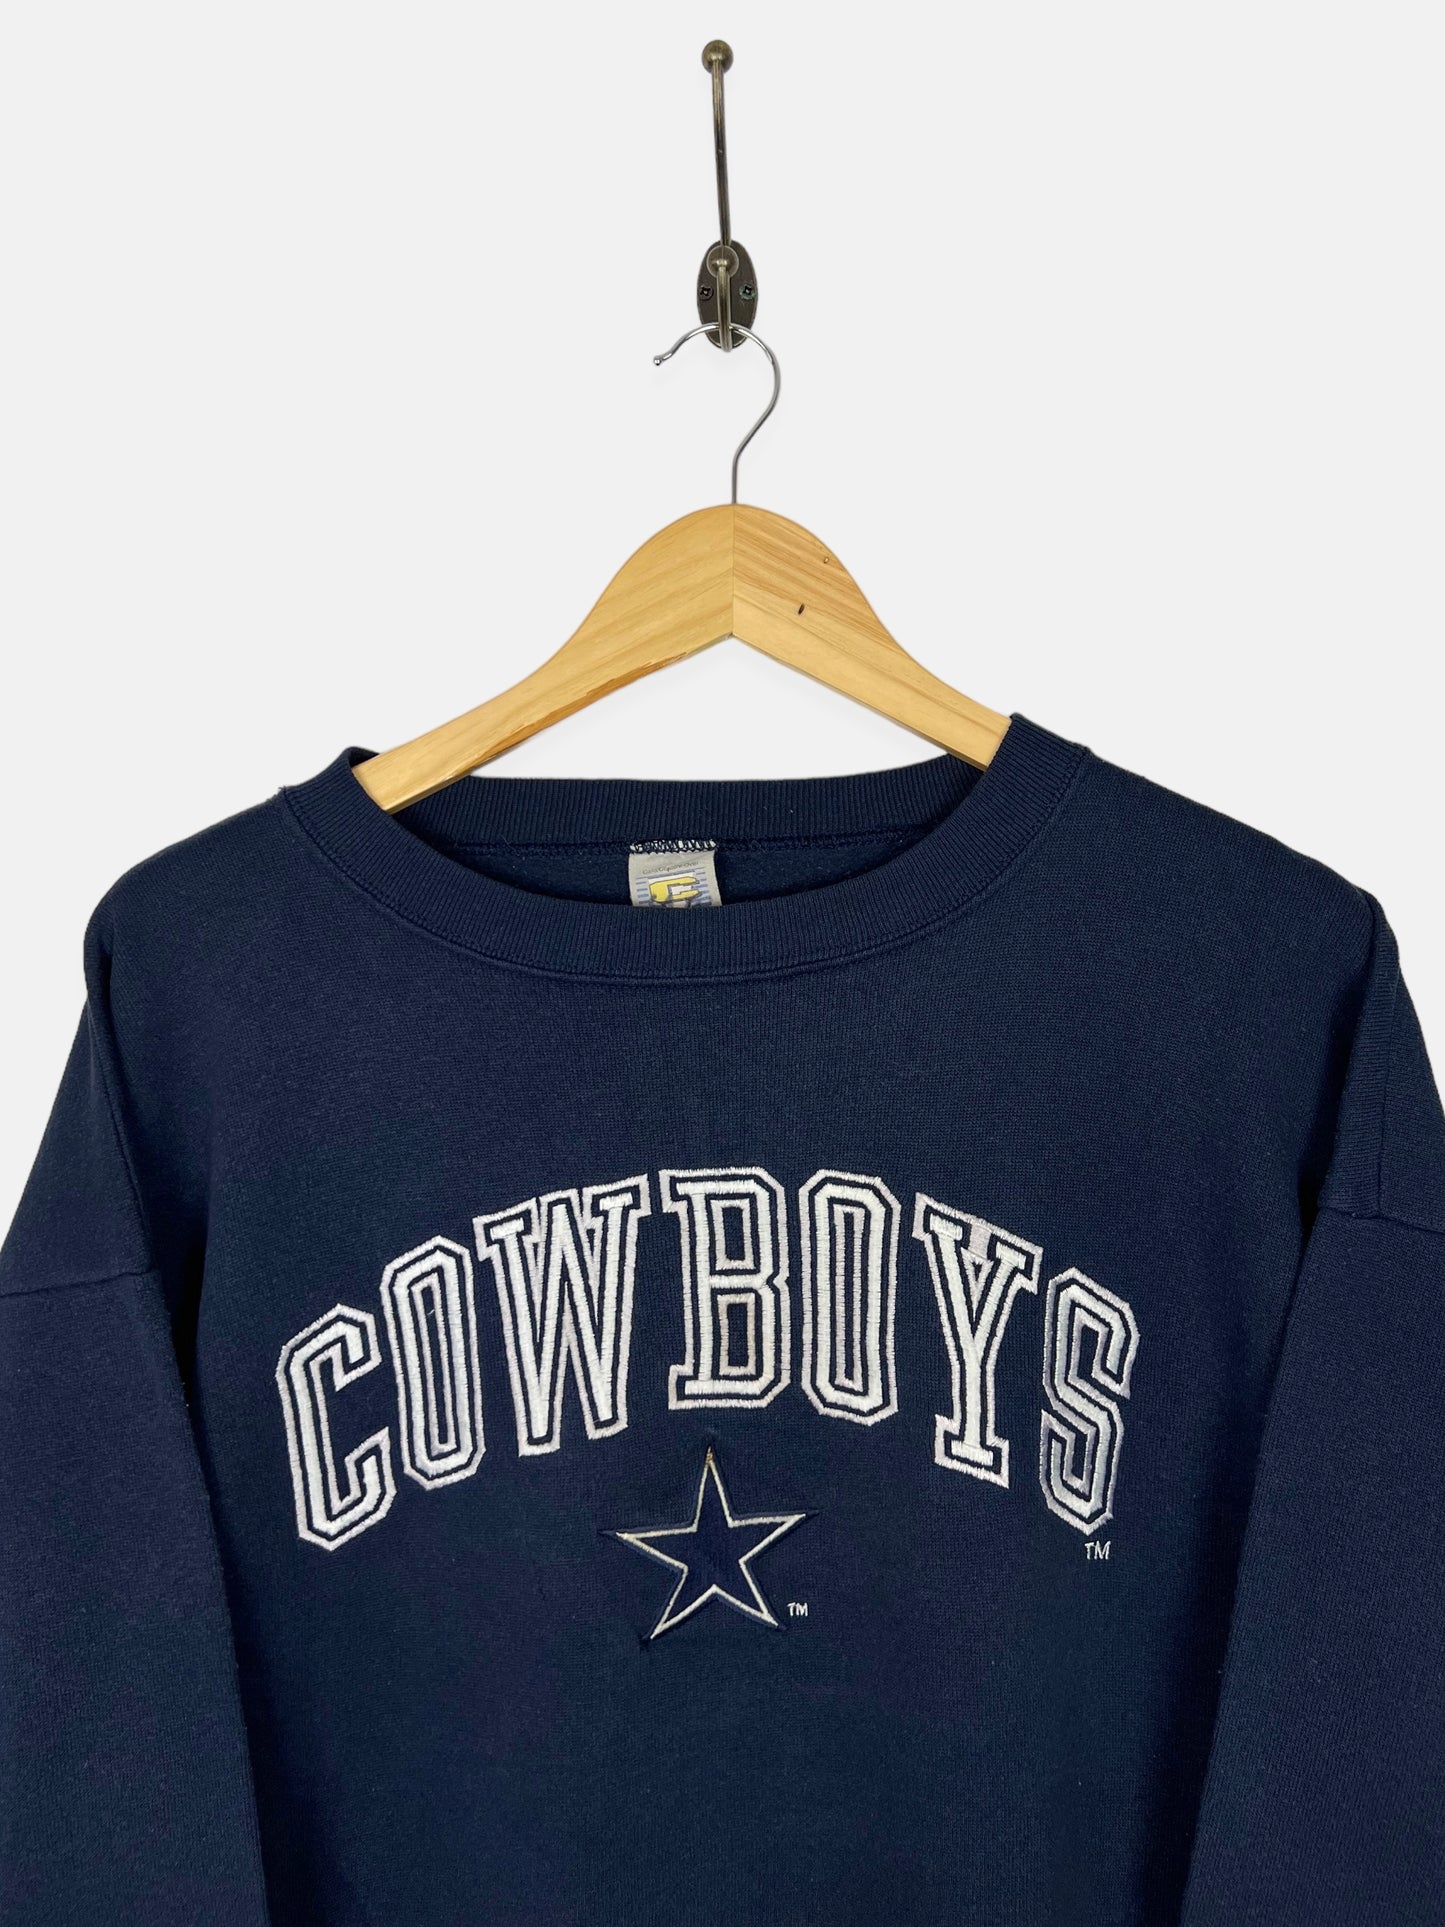 90's Dallas Cowboys NFL USA Made Embroidered Vintage Sweatshirt Size M-L